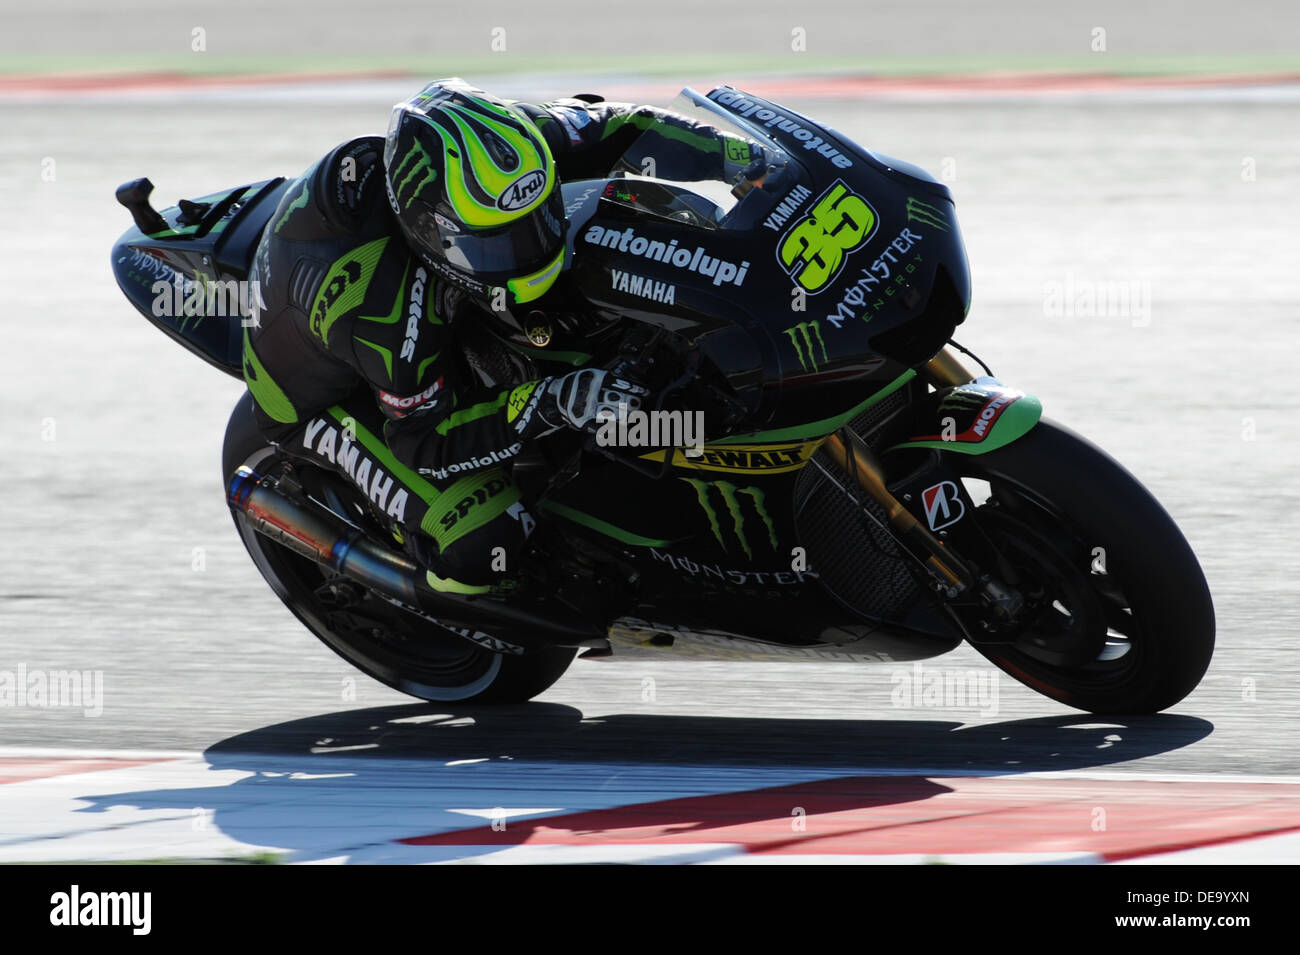 Misano,Italia. September 14th 2013.Cal Crutchlow (Monster Yamaha Tech3) during the Qualifying sessions at Misano circuit Credit:  Gaetano Piazzolla/Alamy Live News Stock Photo